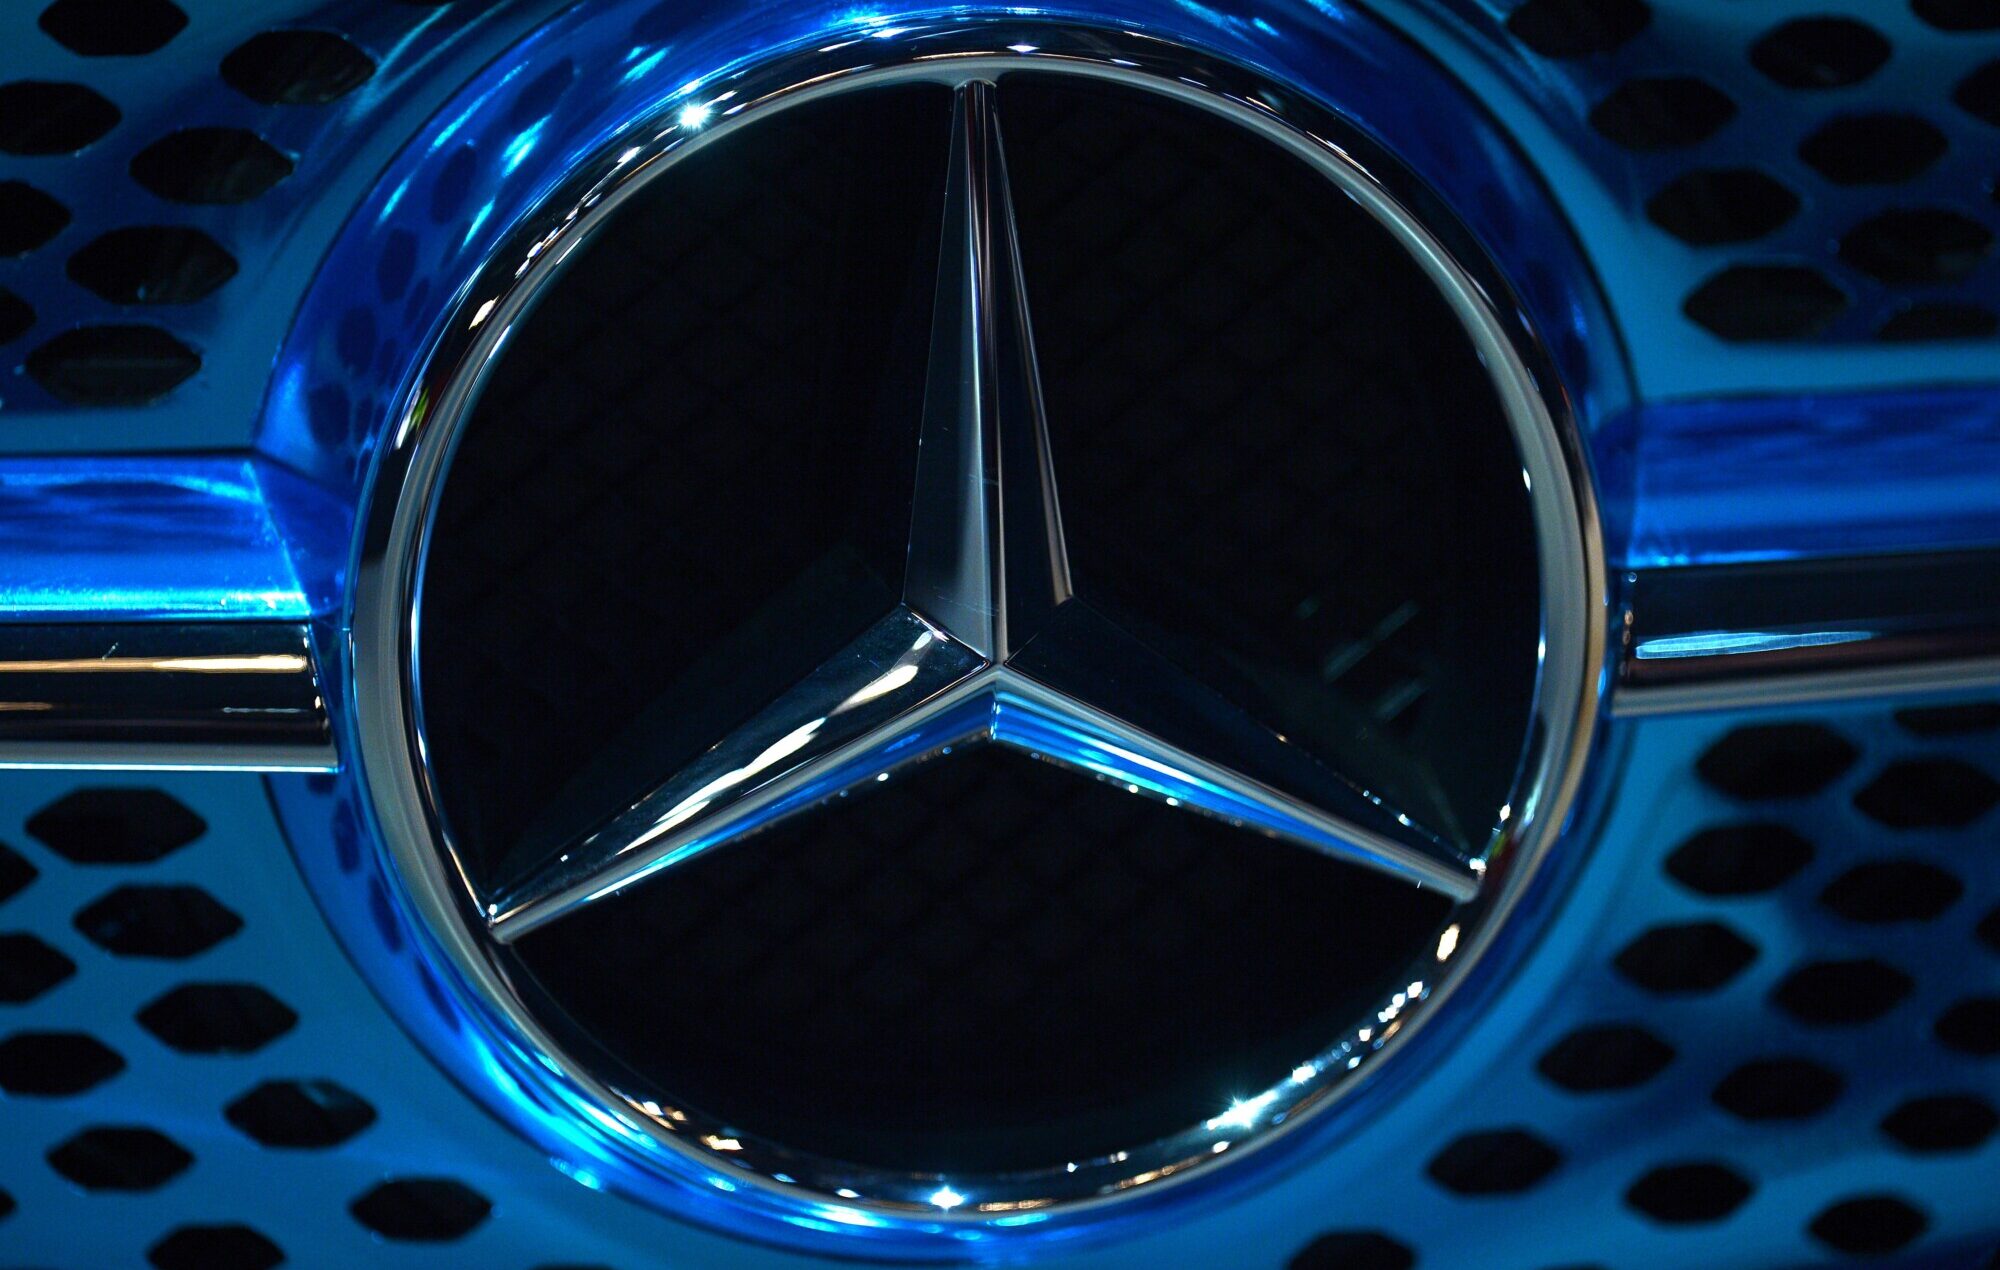 Mercedes to Recall About 1 Million Older Models Worldwide